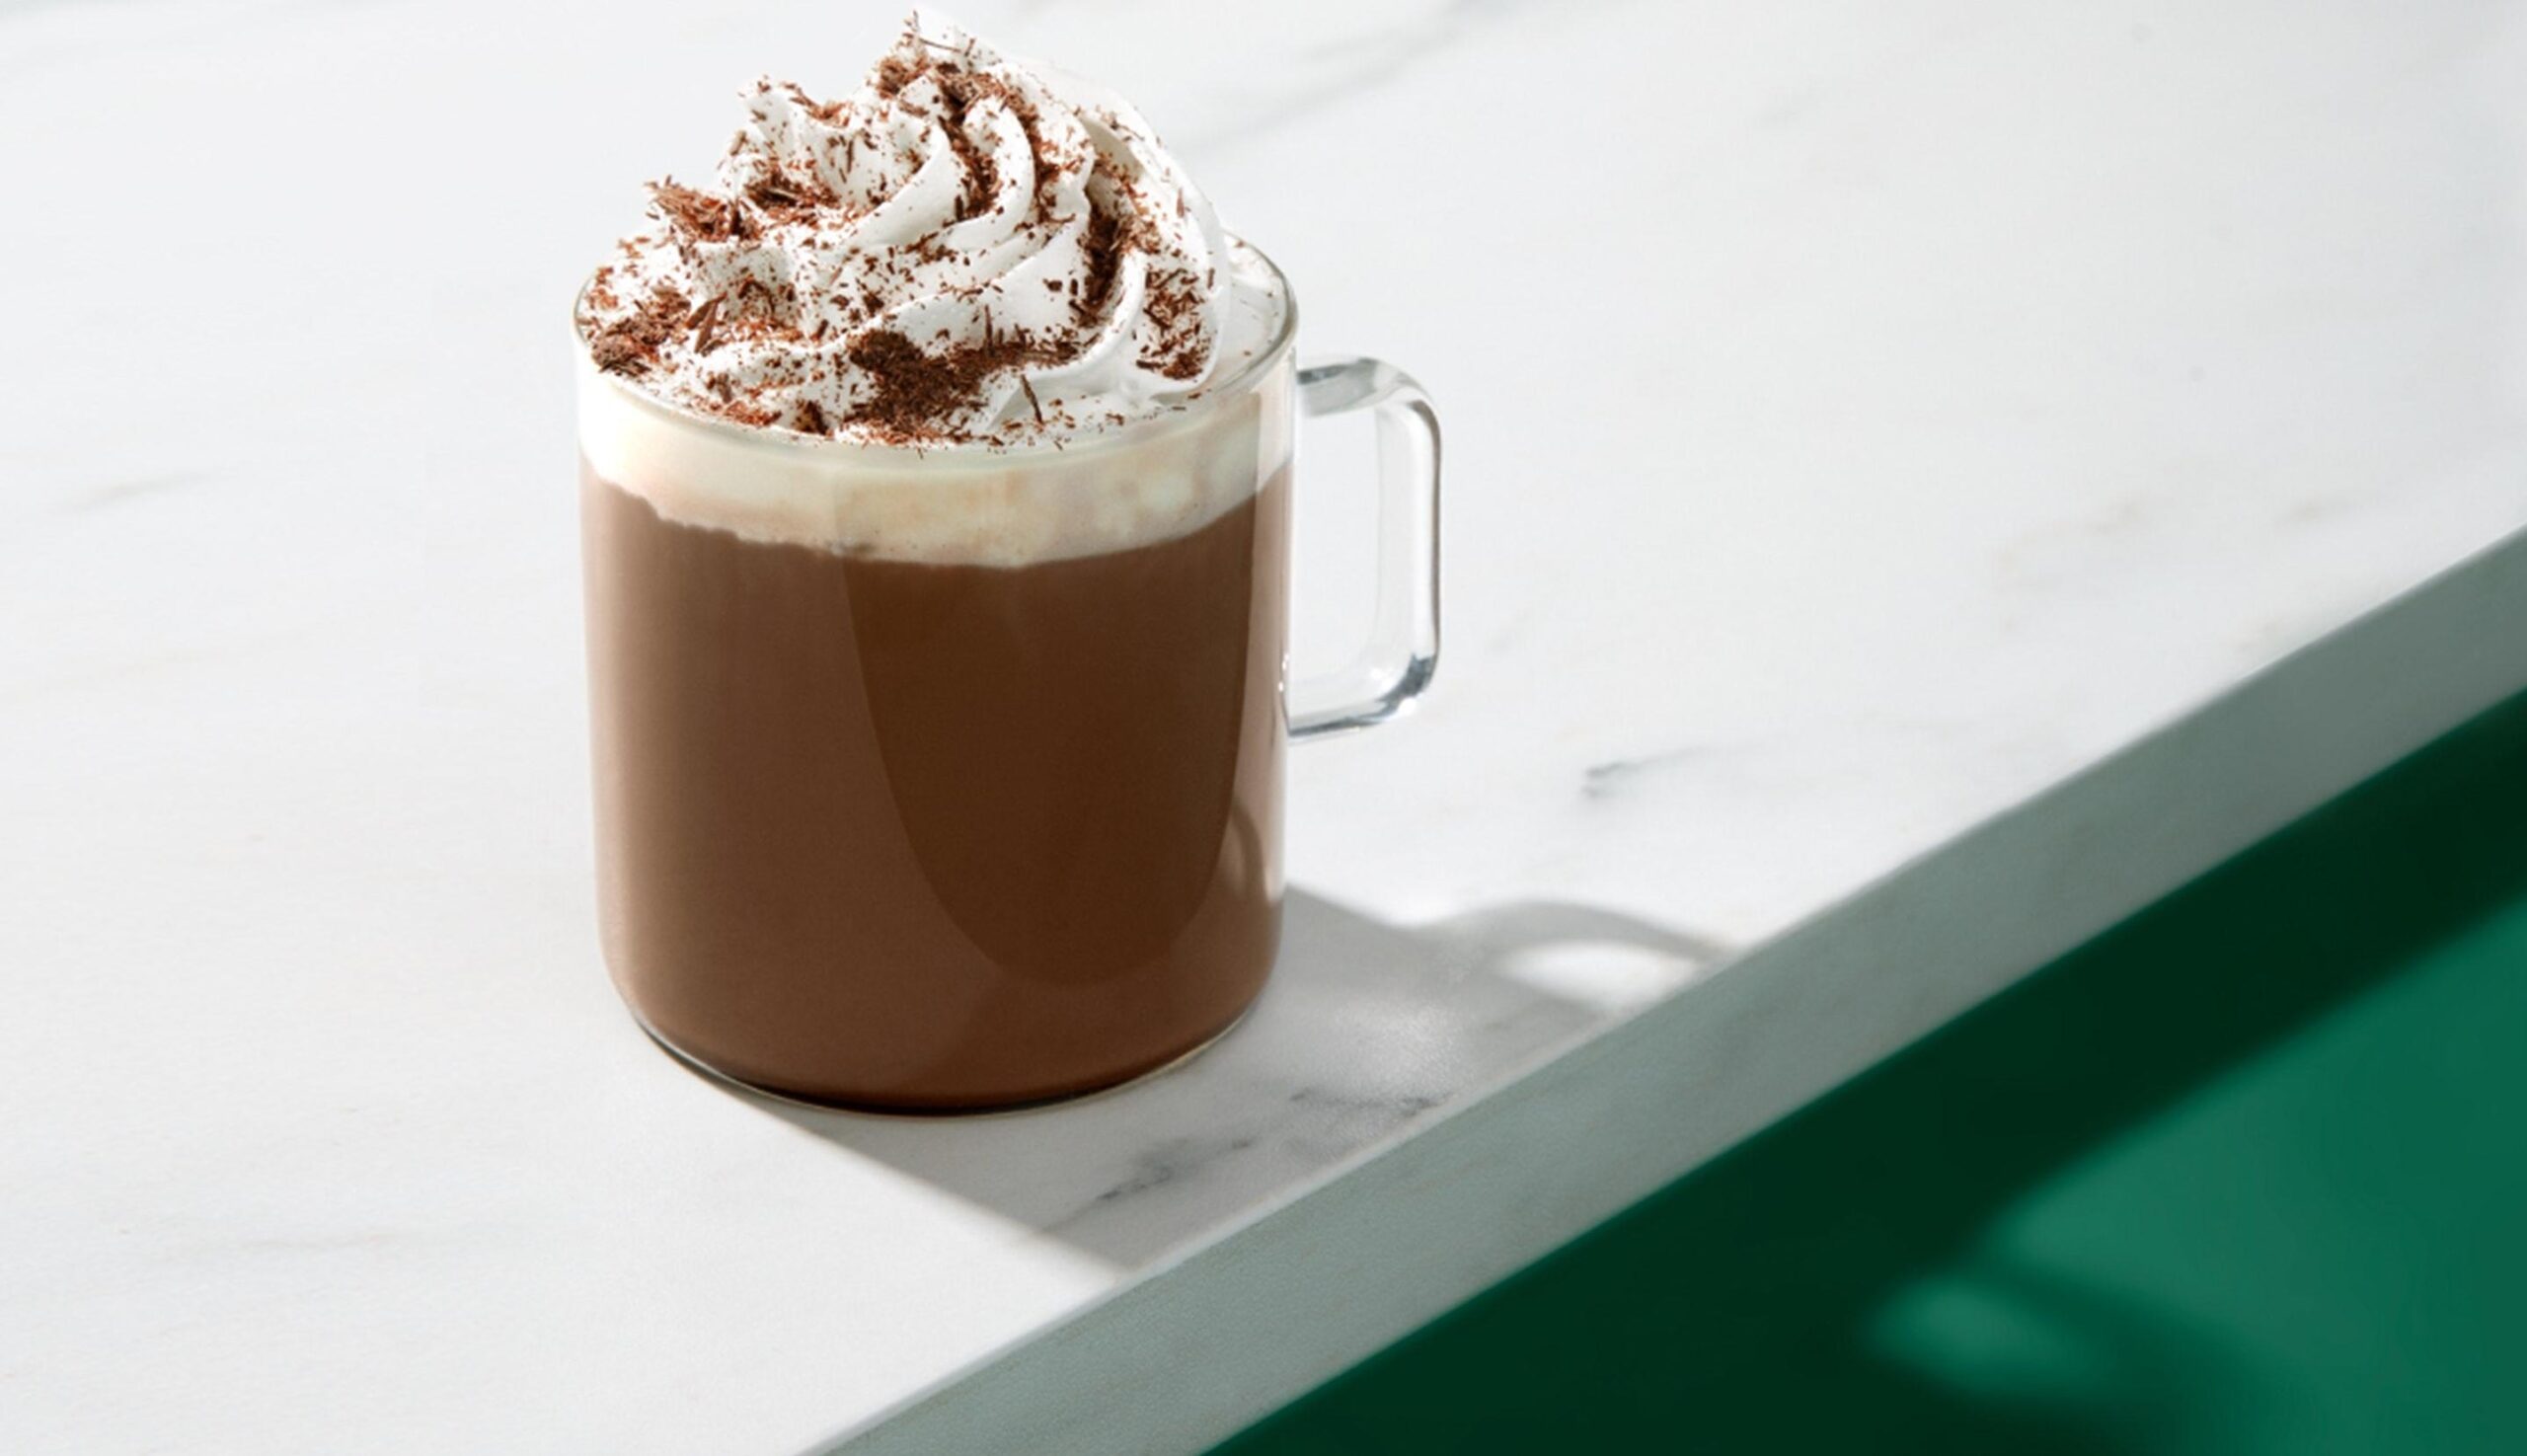  Satisfy your sweet tooth with our delicious mocha